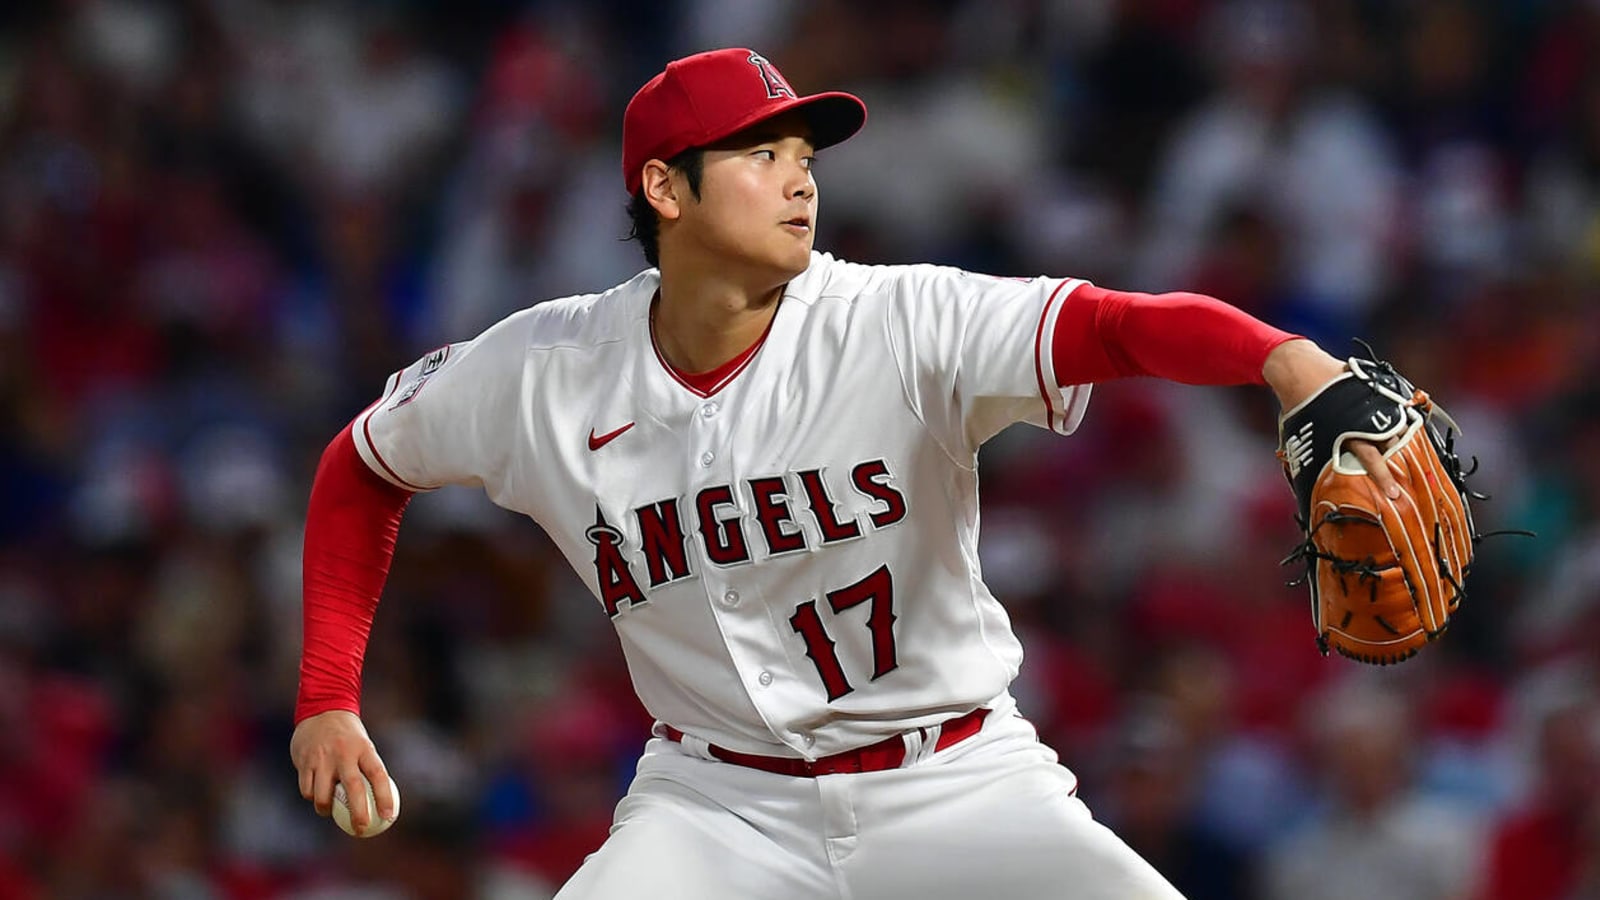 Astros manager is puzzled by Shohei Ohtani